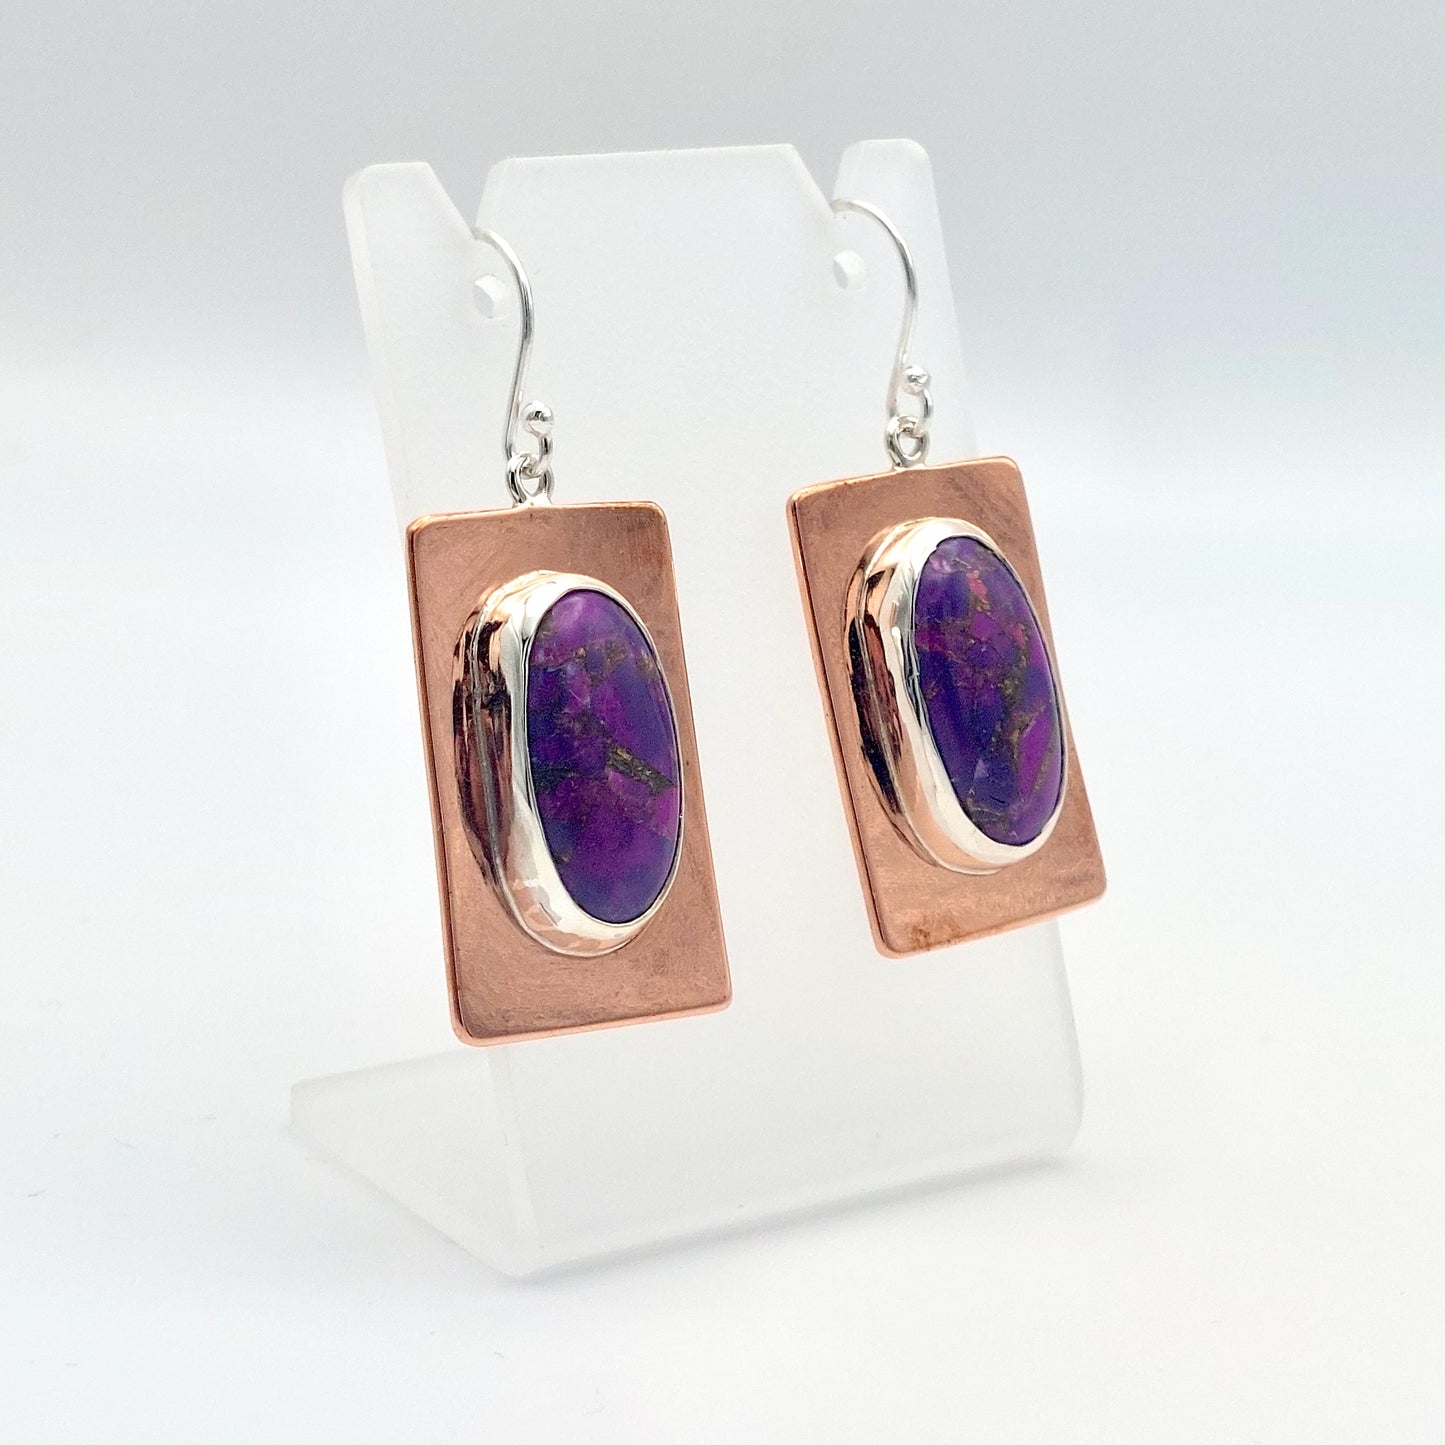 Copper/Silver Earrings Featuring Purple Turquoise Cabochons